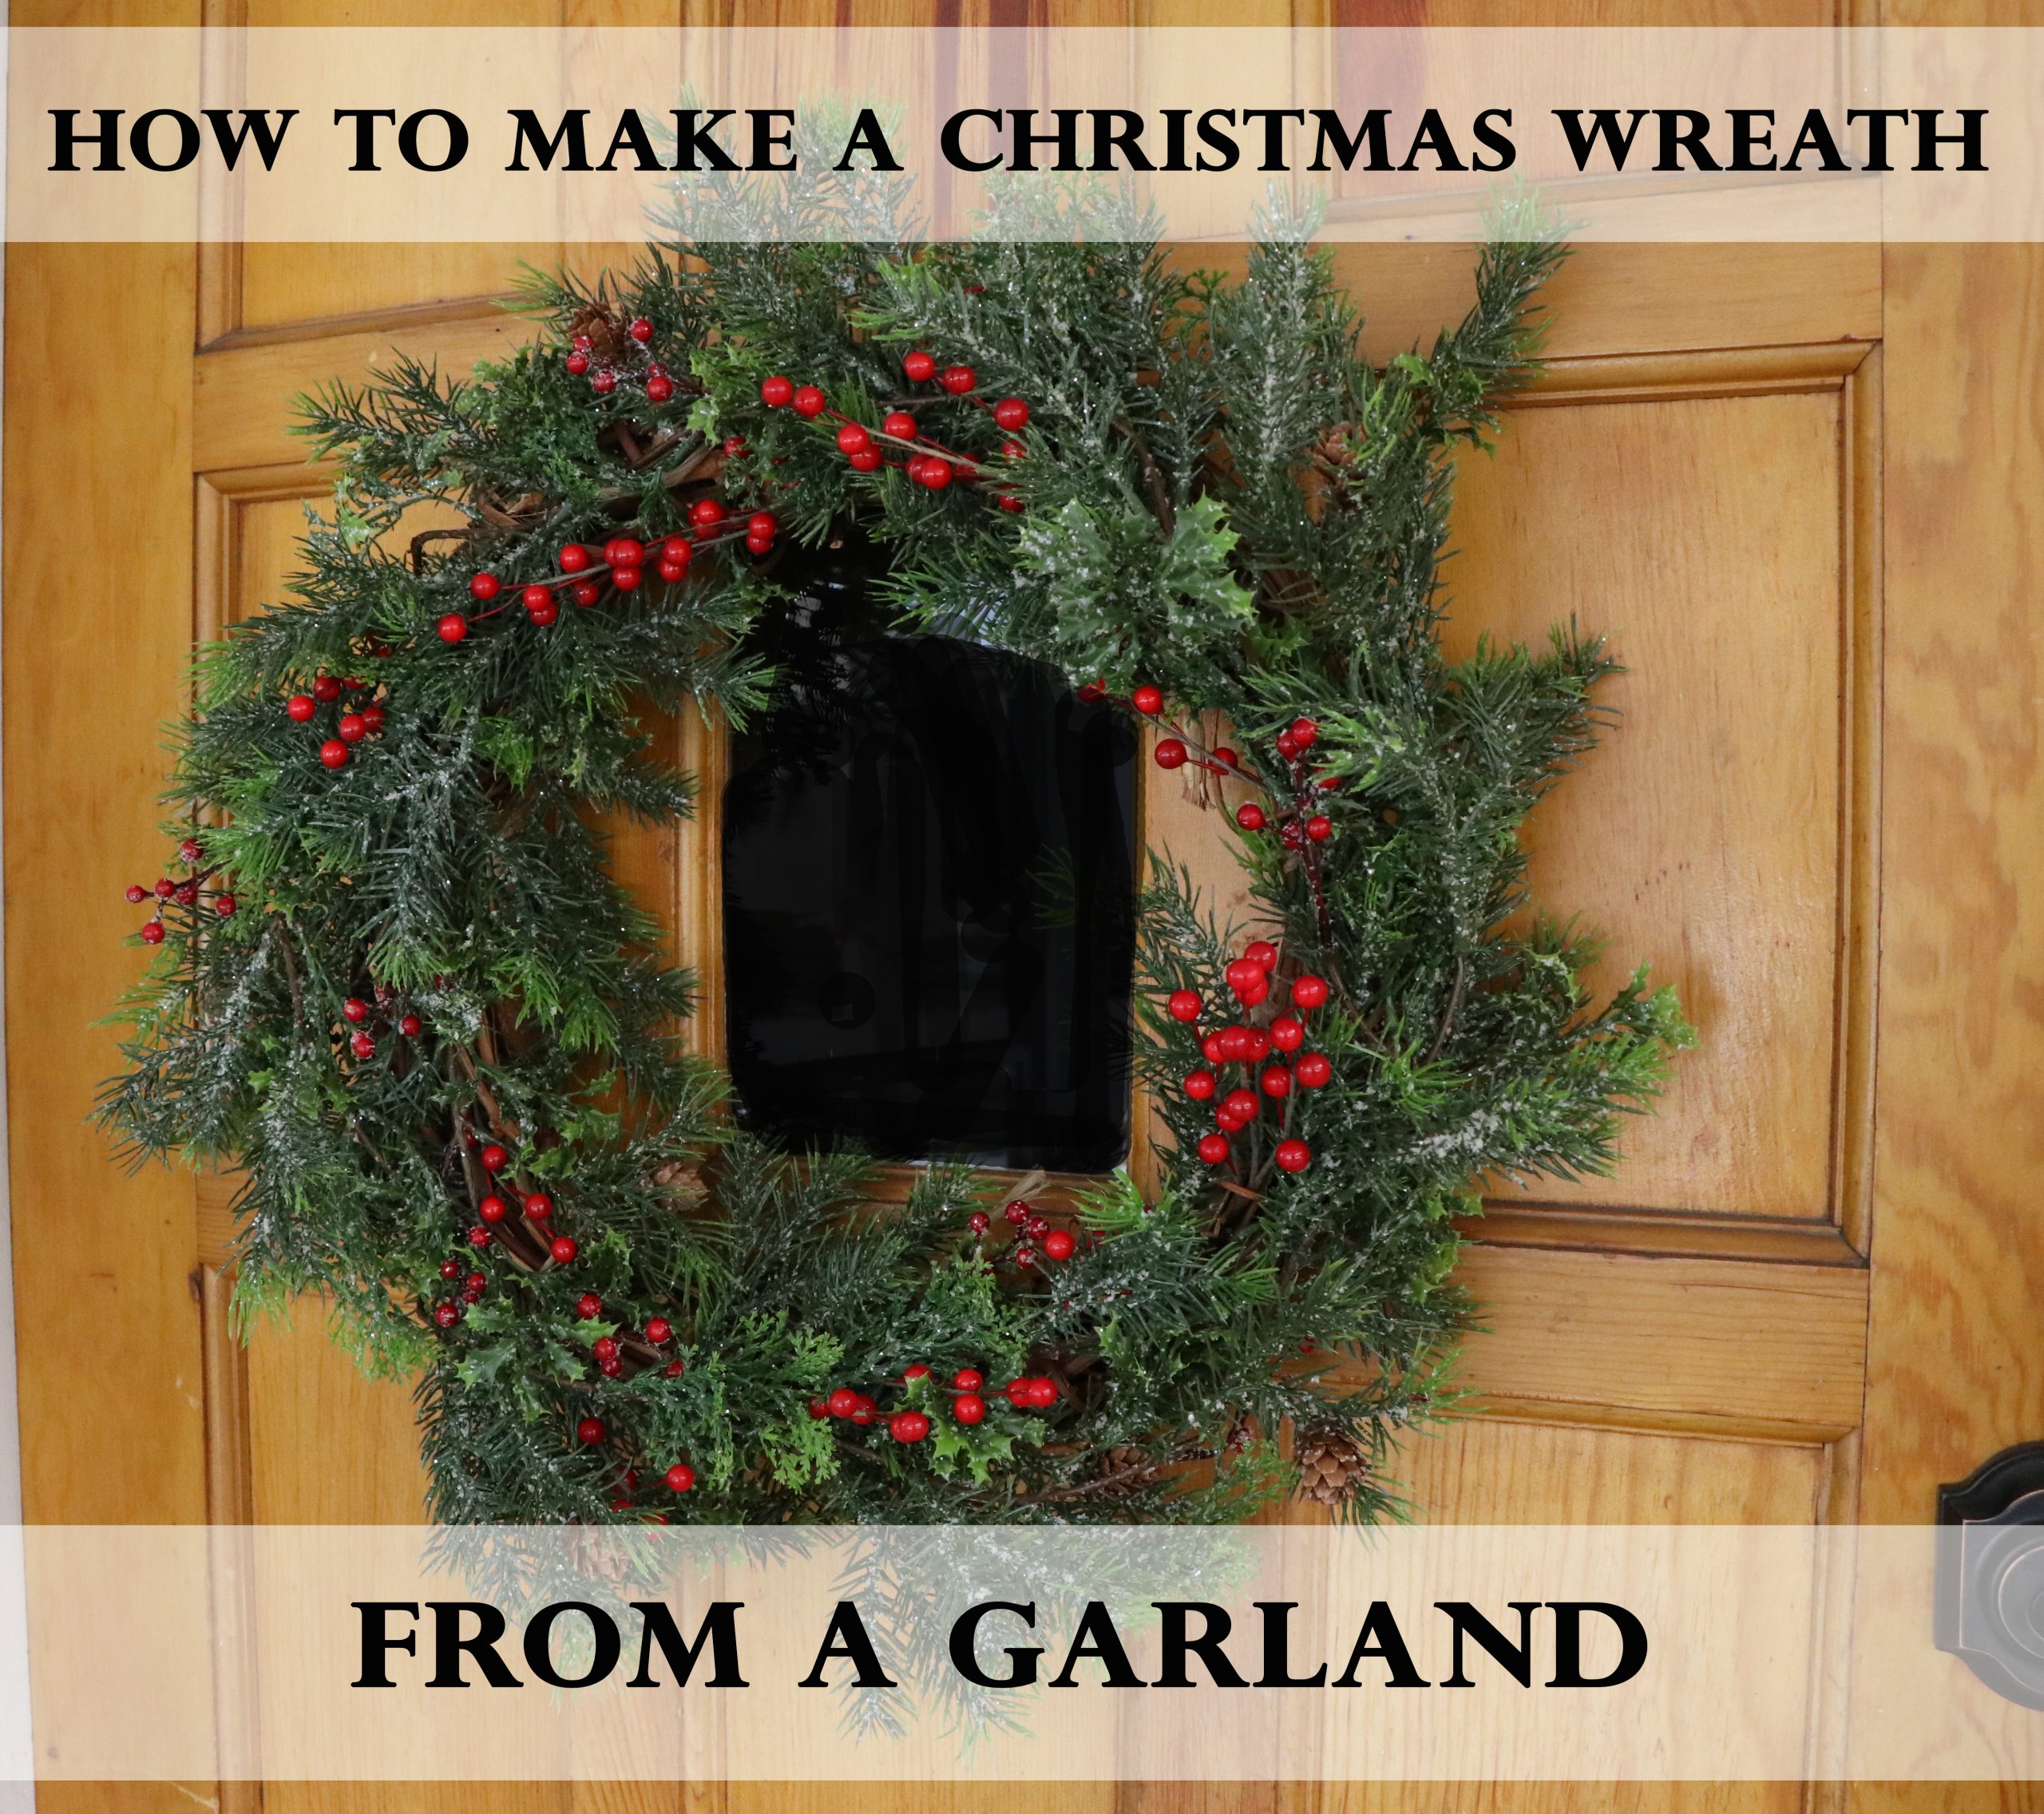 How to Make a Christmas Wreath from Garland